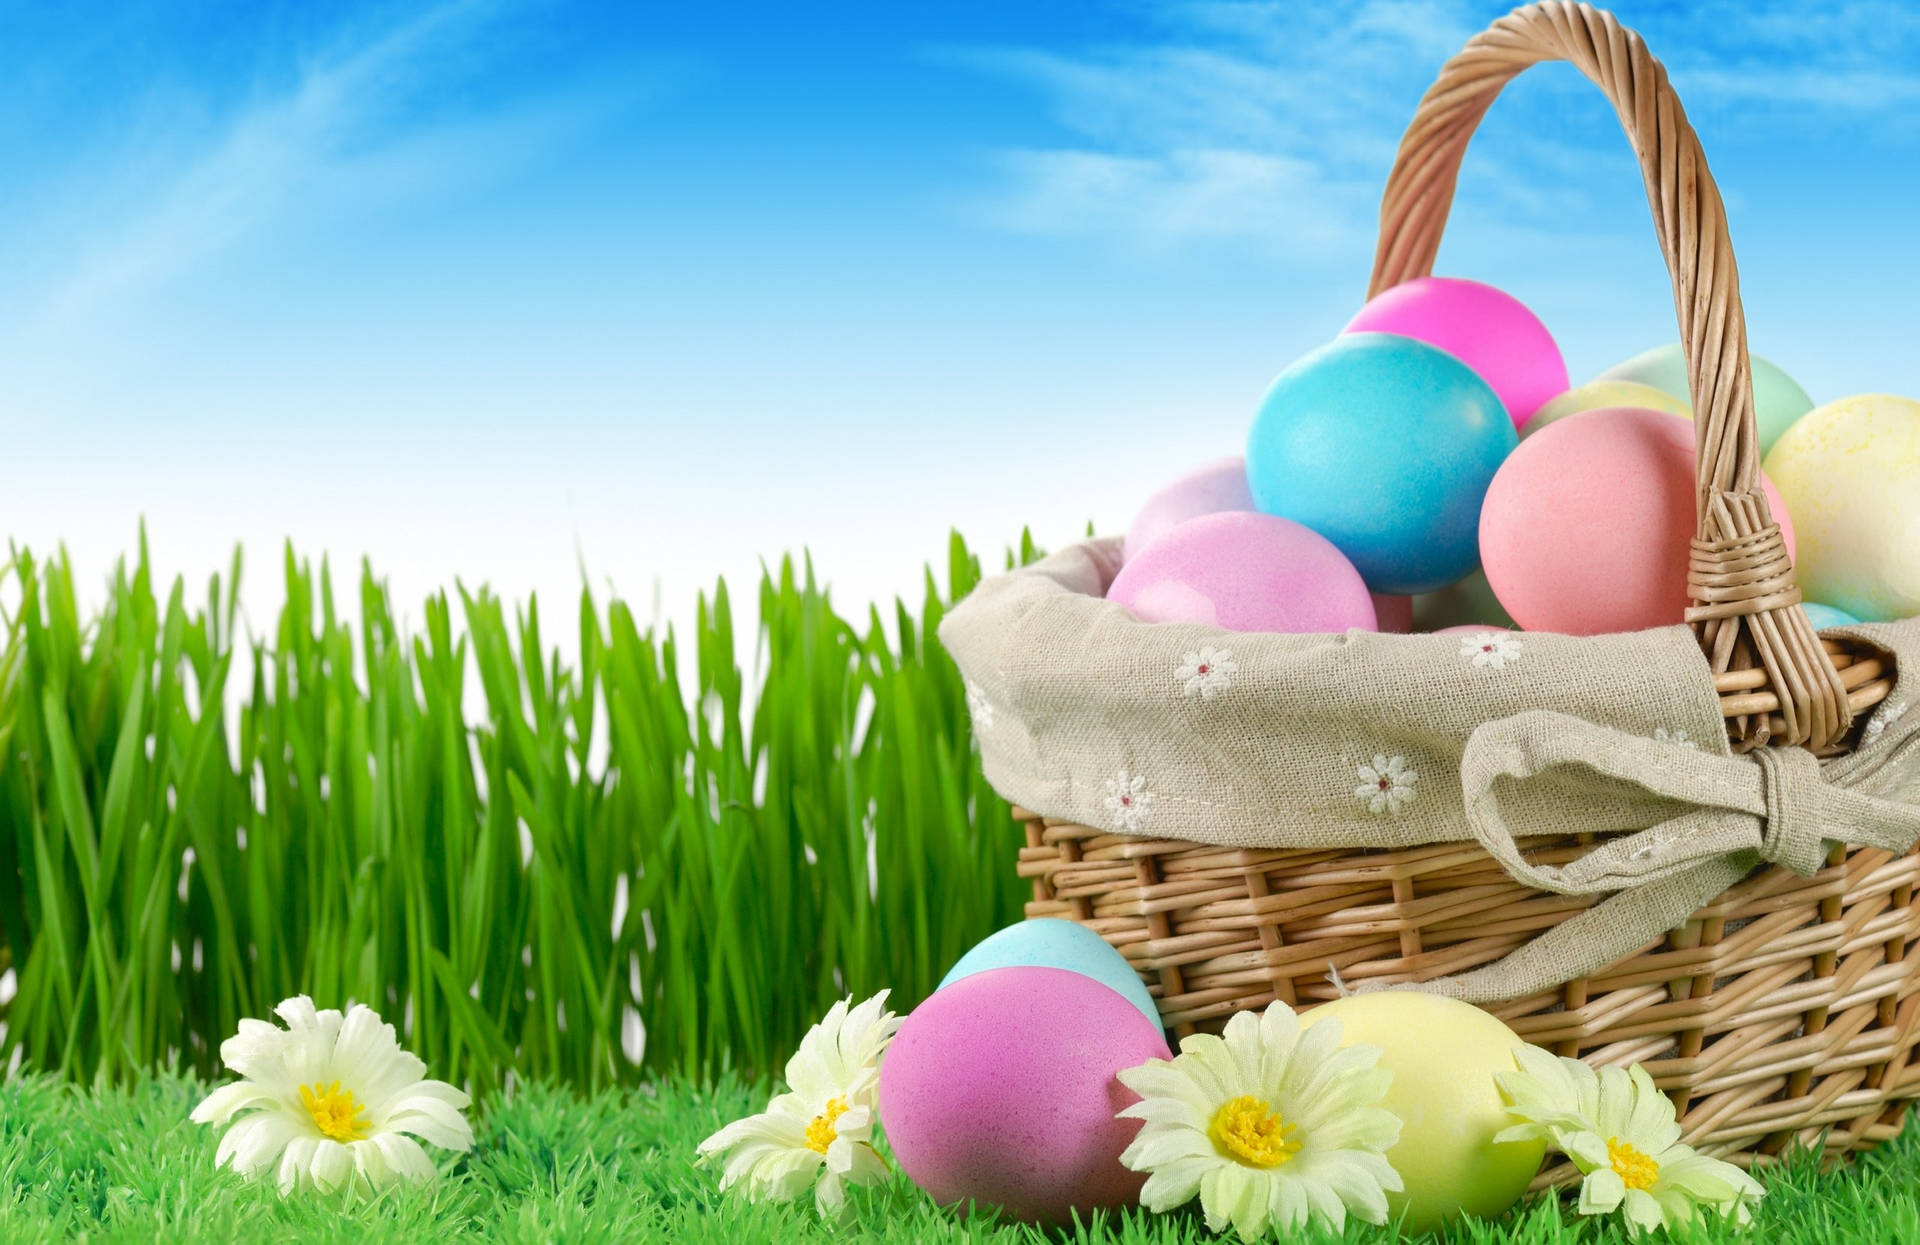 Cute Pastel Easter Eggs Background